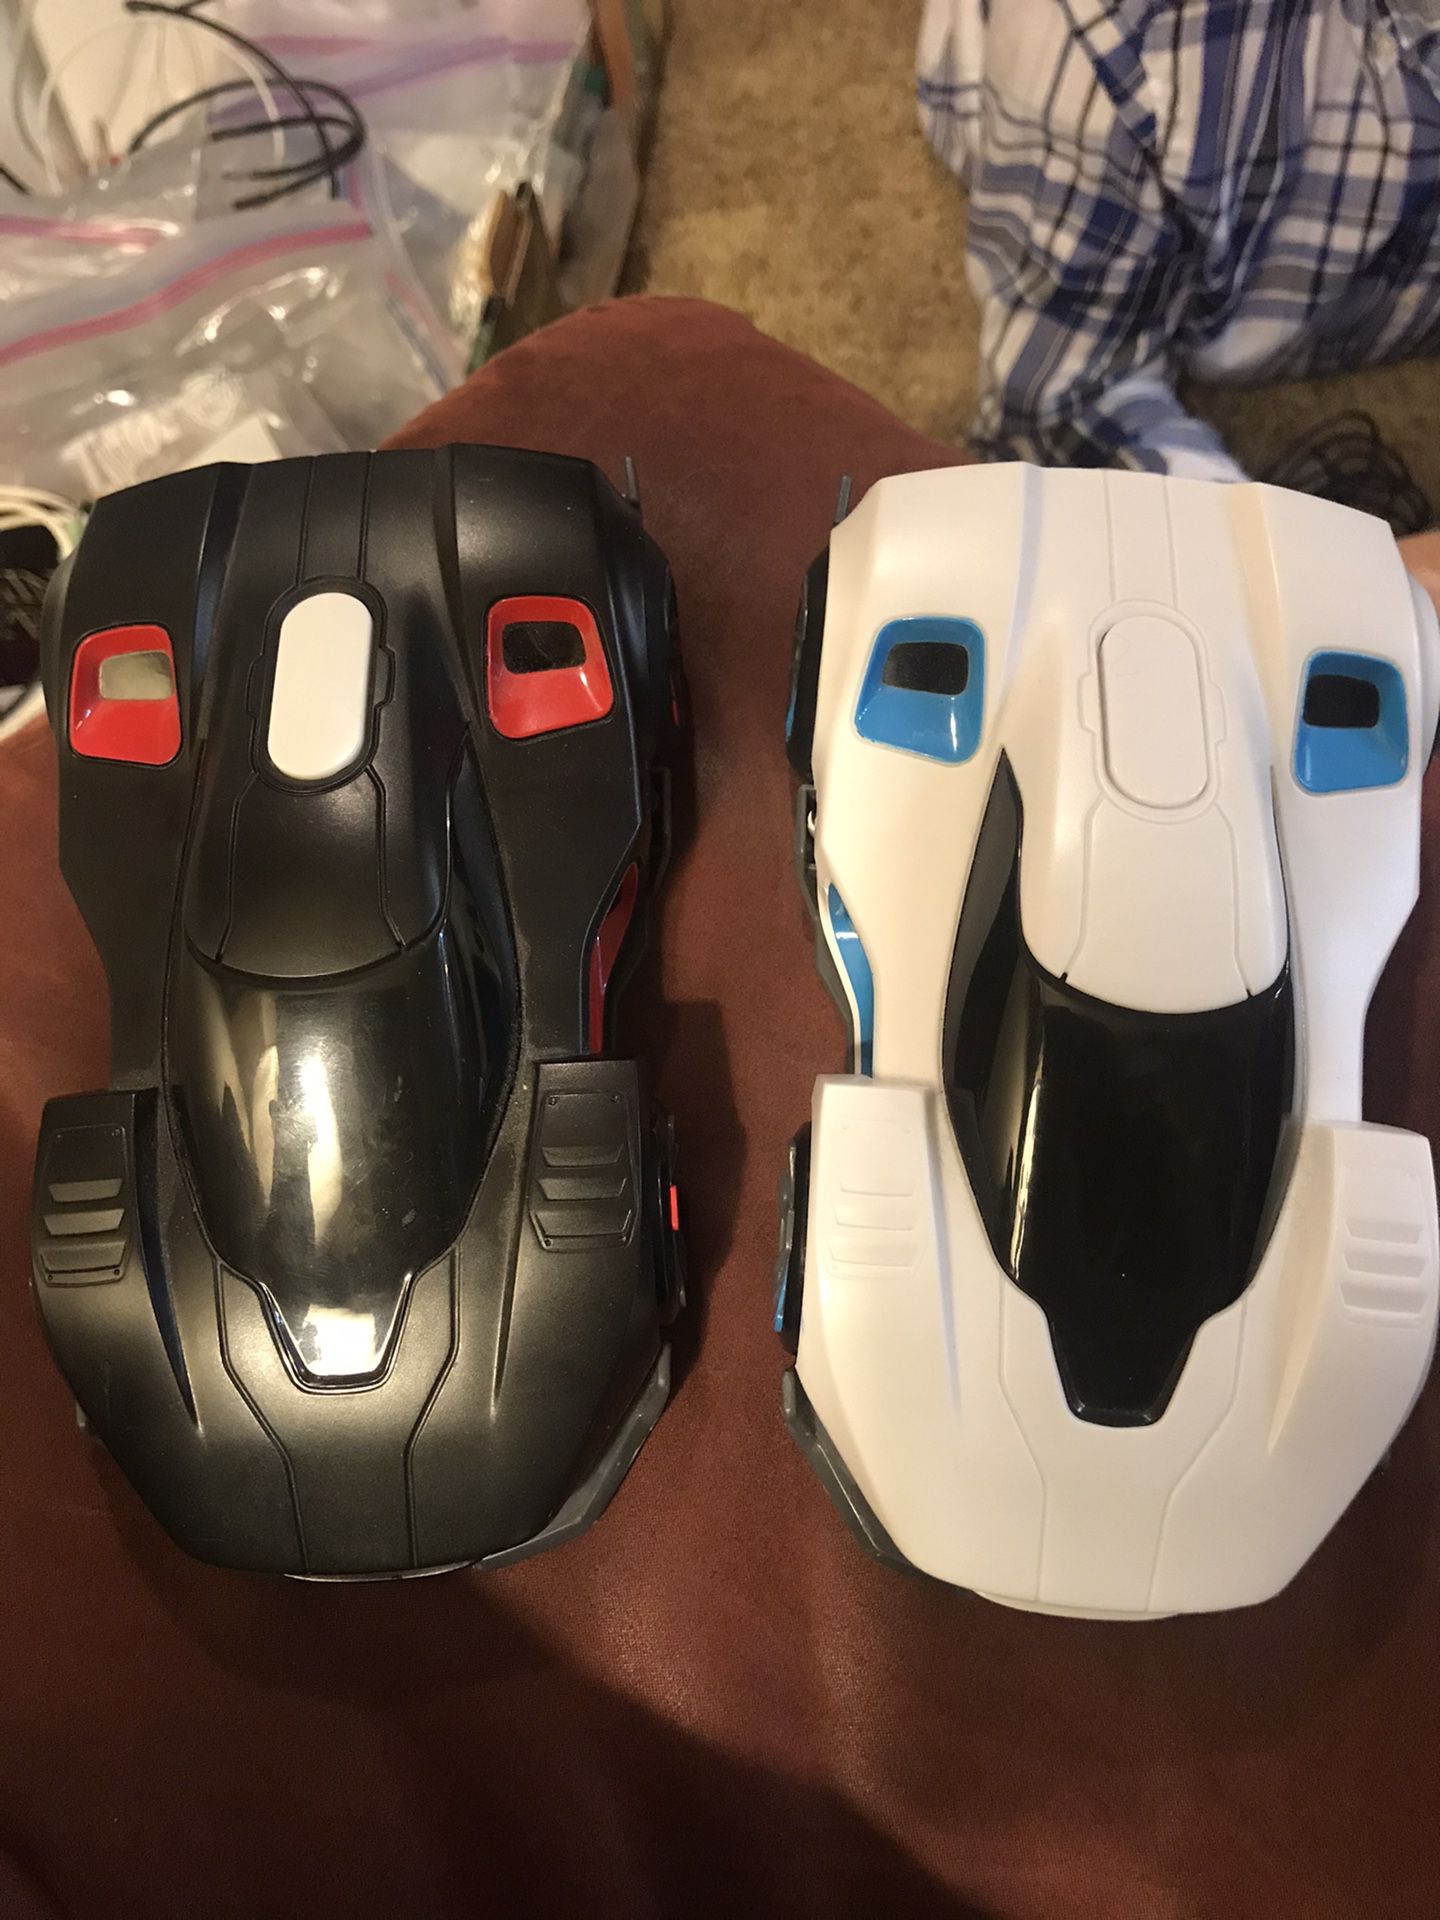 R.E.V. Robotic smartphone controlled cars (2pack)